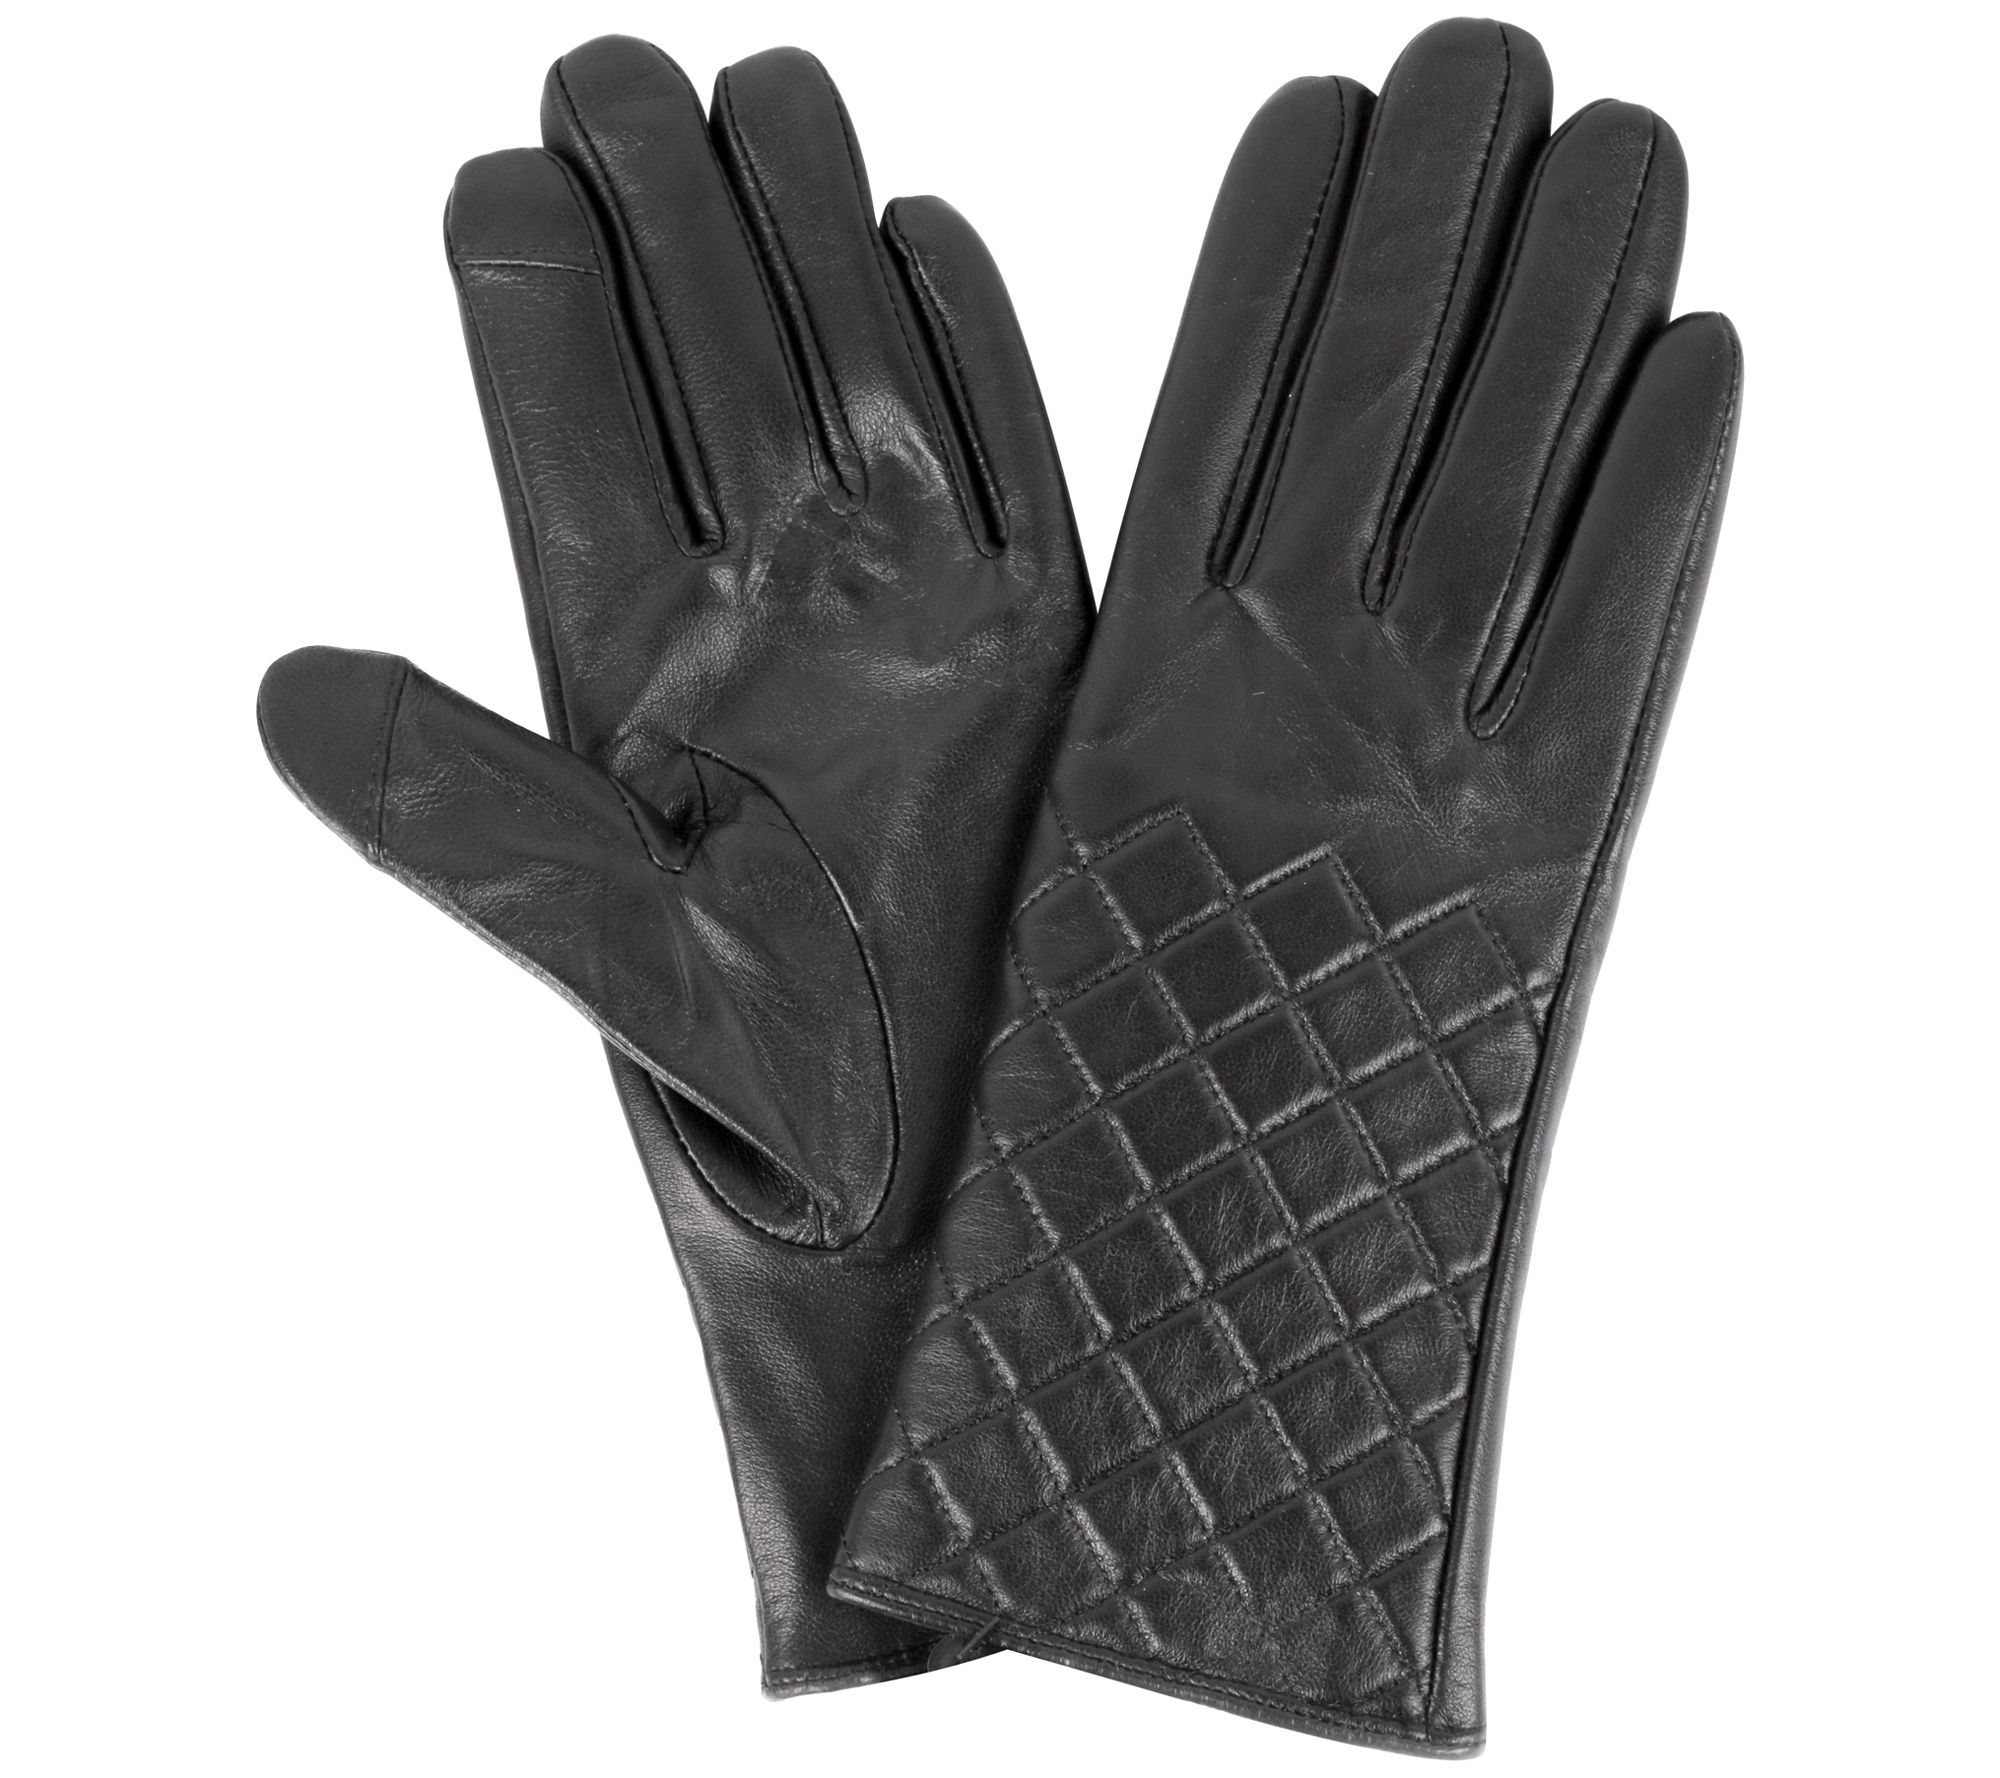 Karla Hanson Women's Quilted Leather Touch Screen Gloves - QVC.com